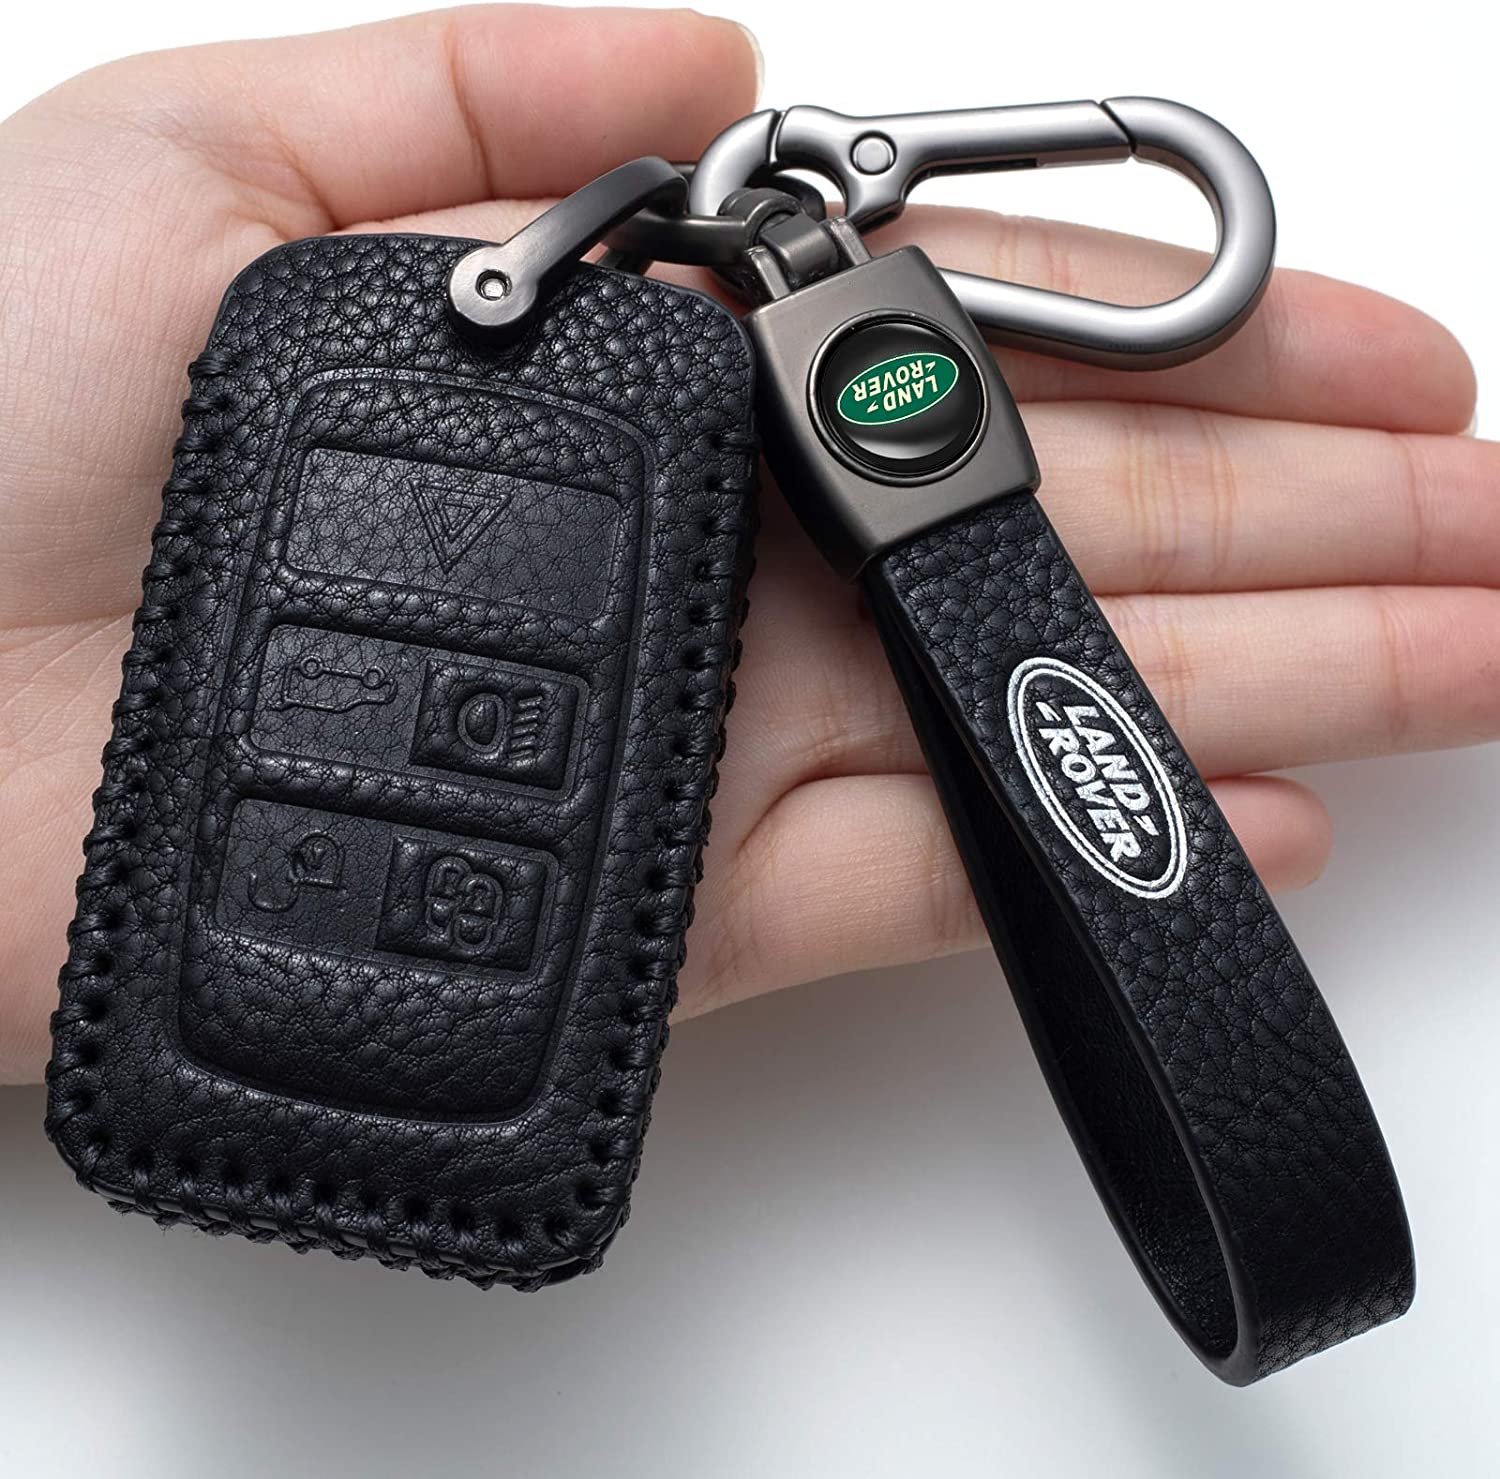 Nonesuper (Black) for Land Rover Key Fob Cover, Genuine Leather Key Fob